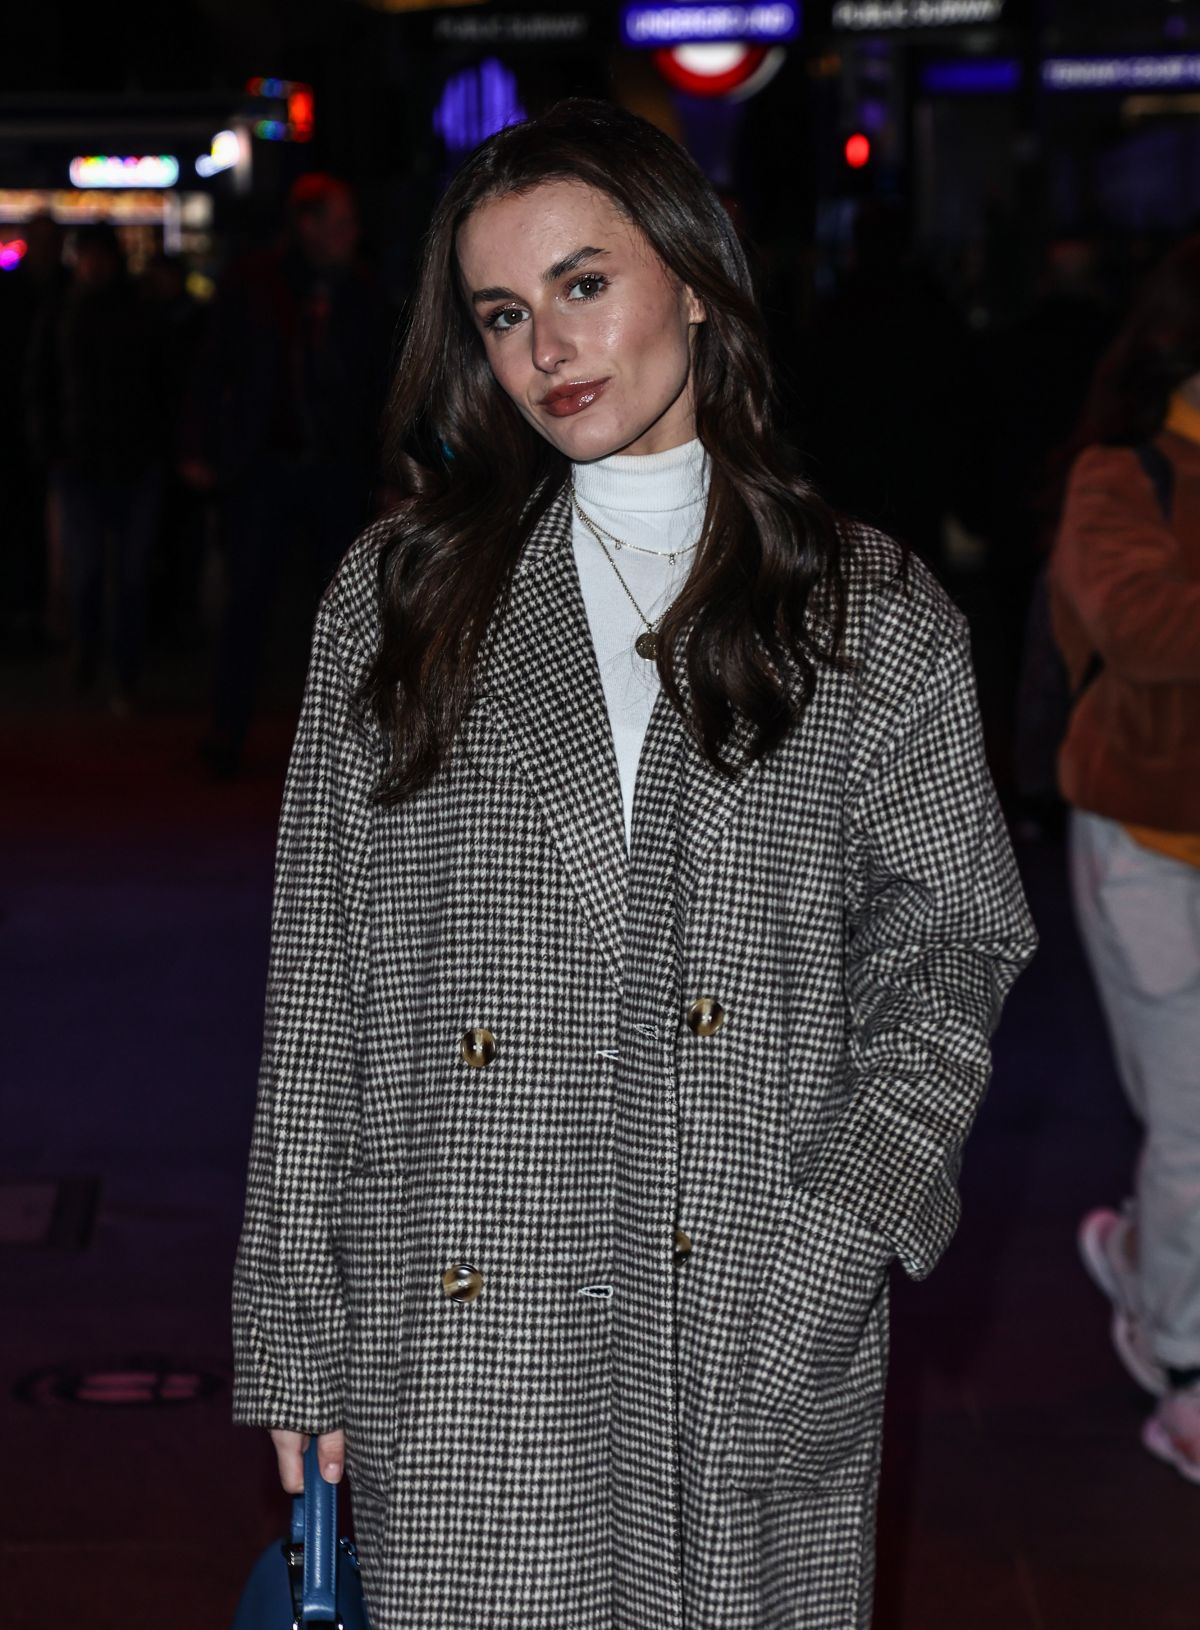 AMBER DAVIES at Dominion Theatre in London 11/29/2022 – HawtCelebs